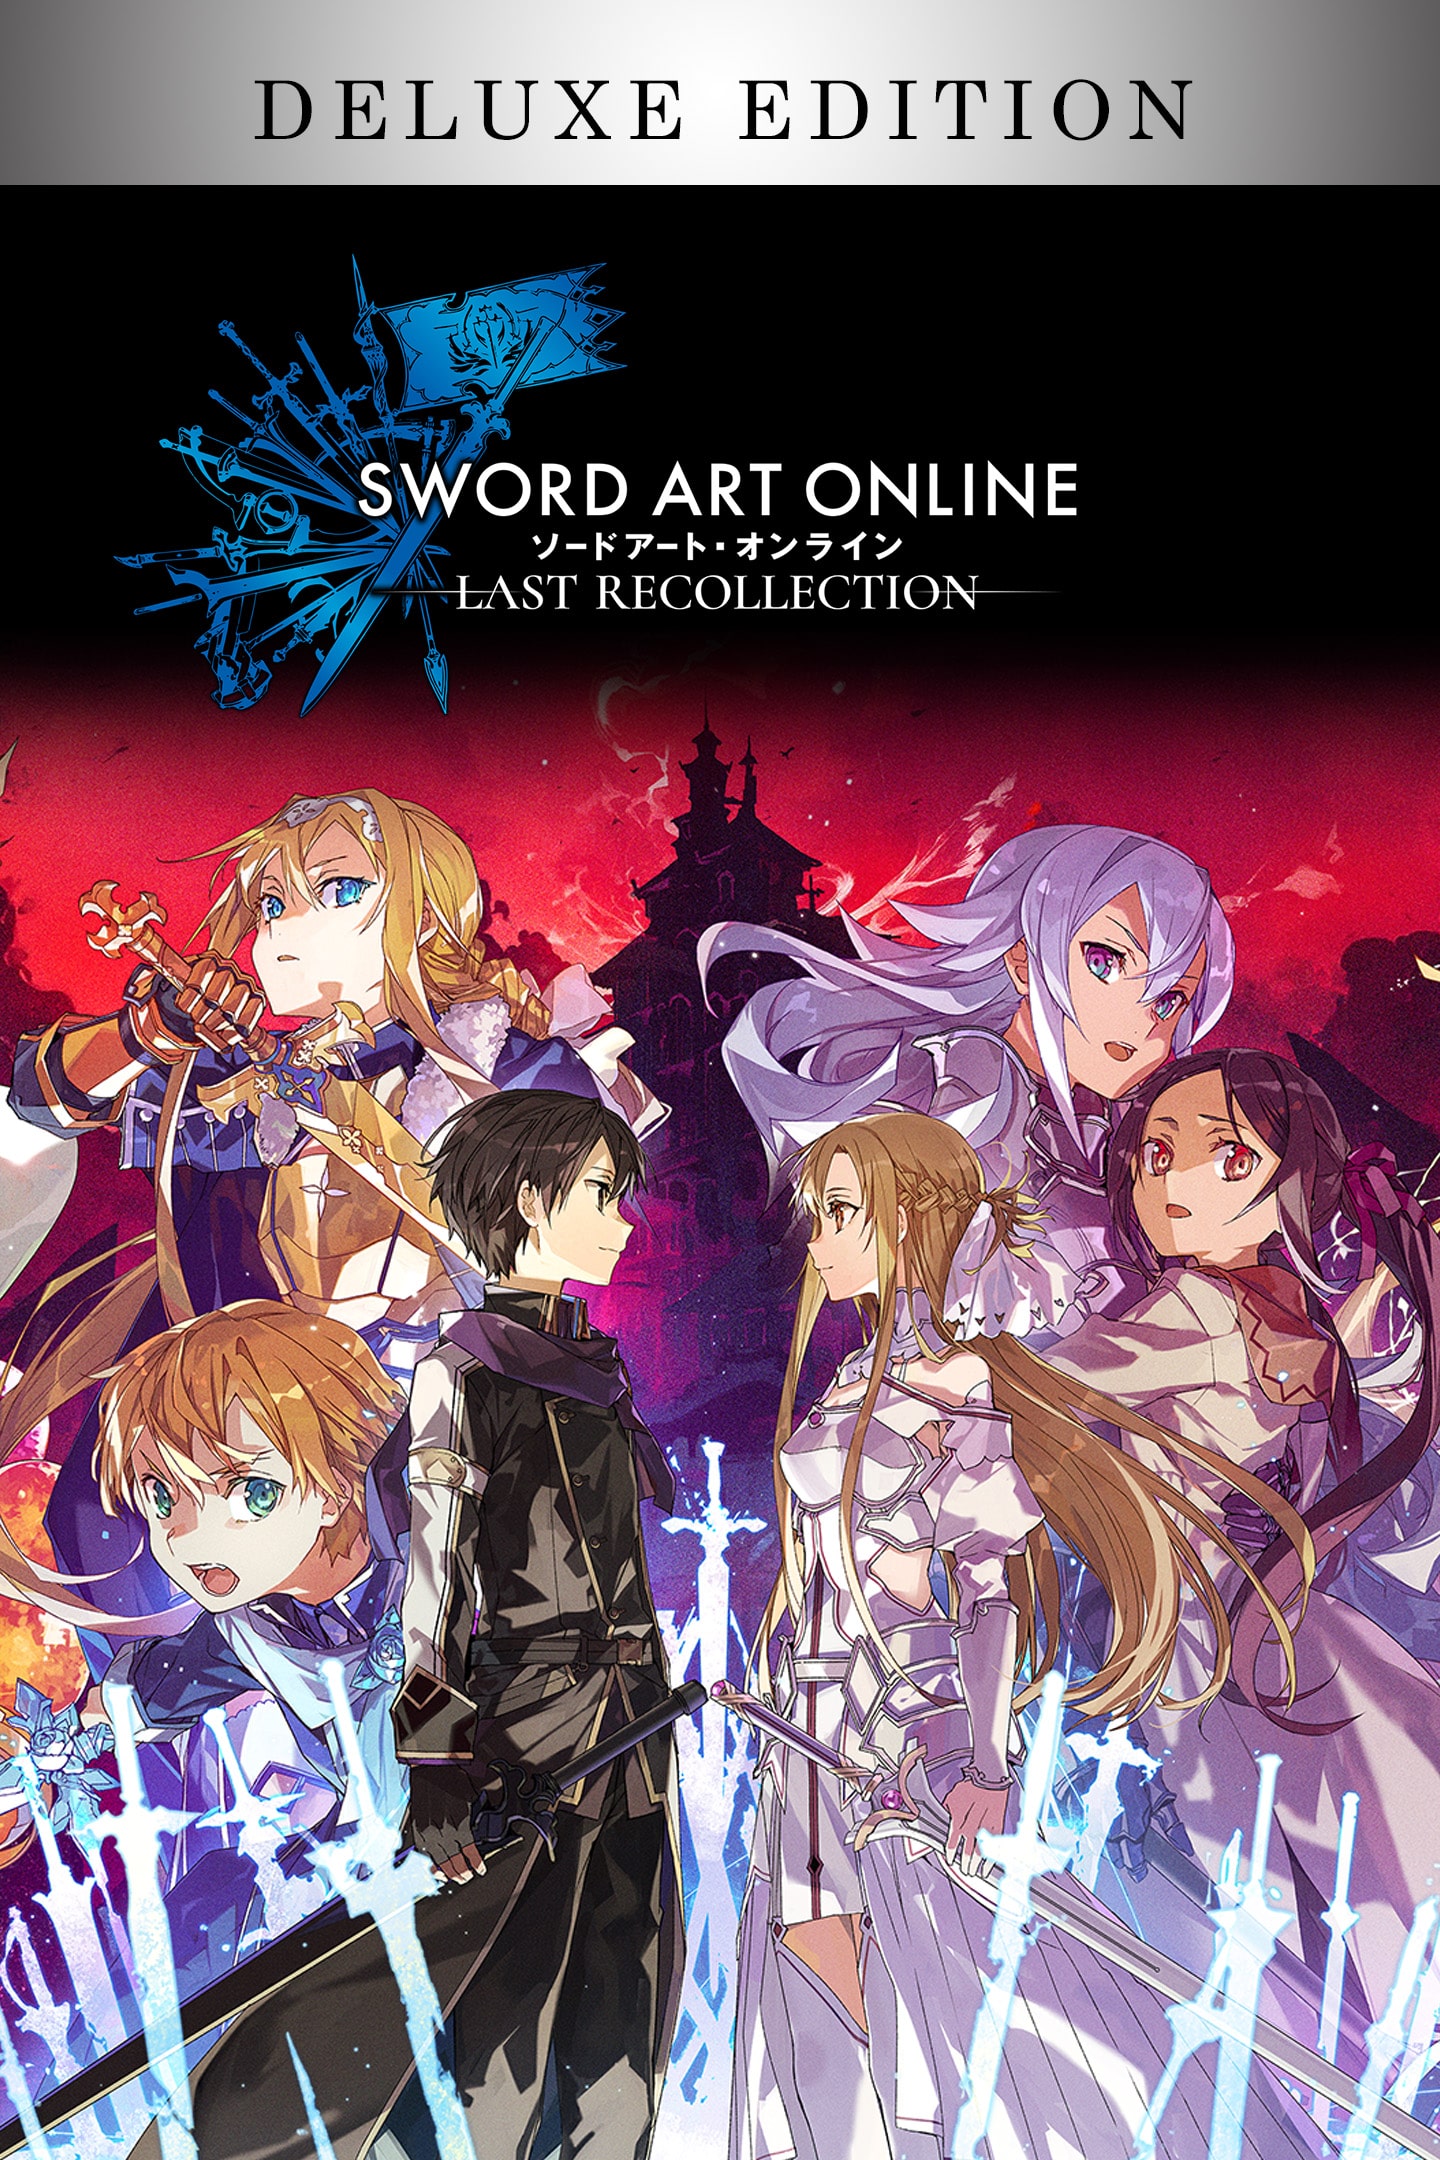 SWORD ART ONLINE Last Recollection - Deluxe Edition PS4 & PS5 